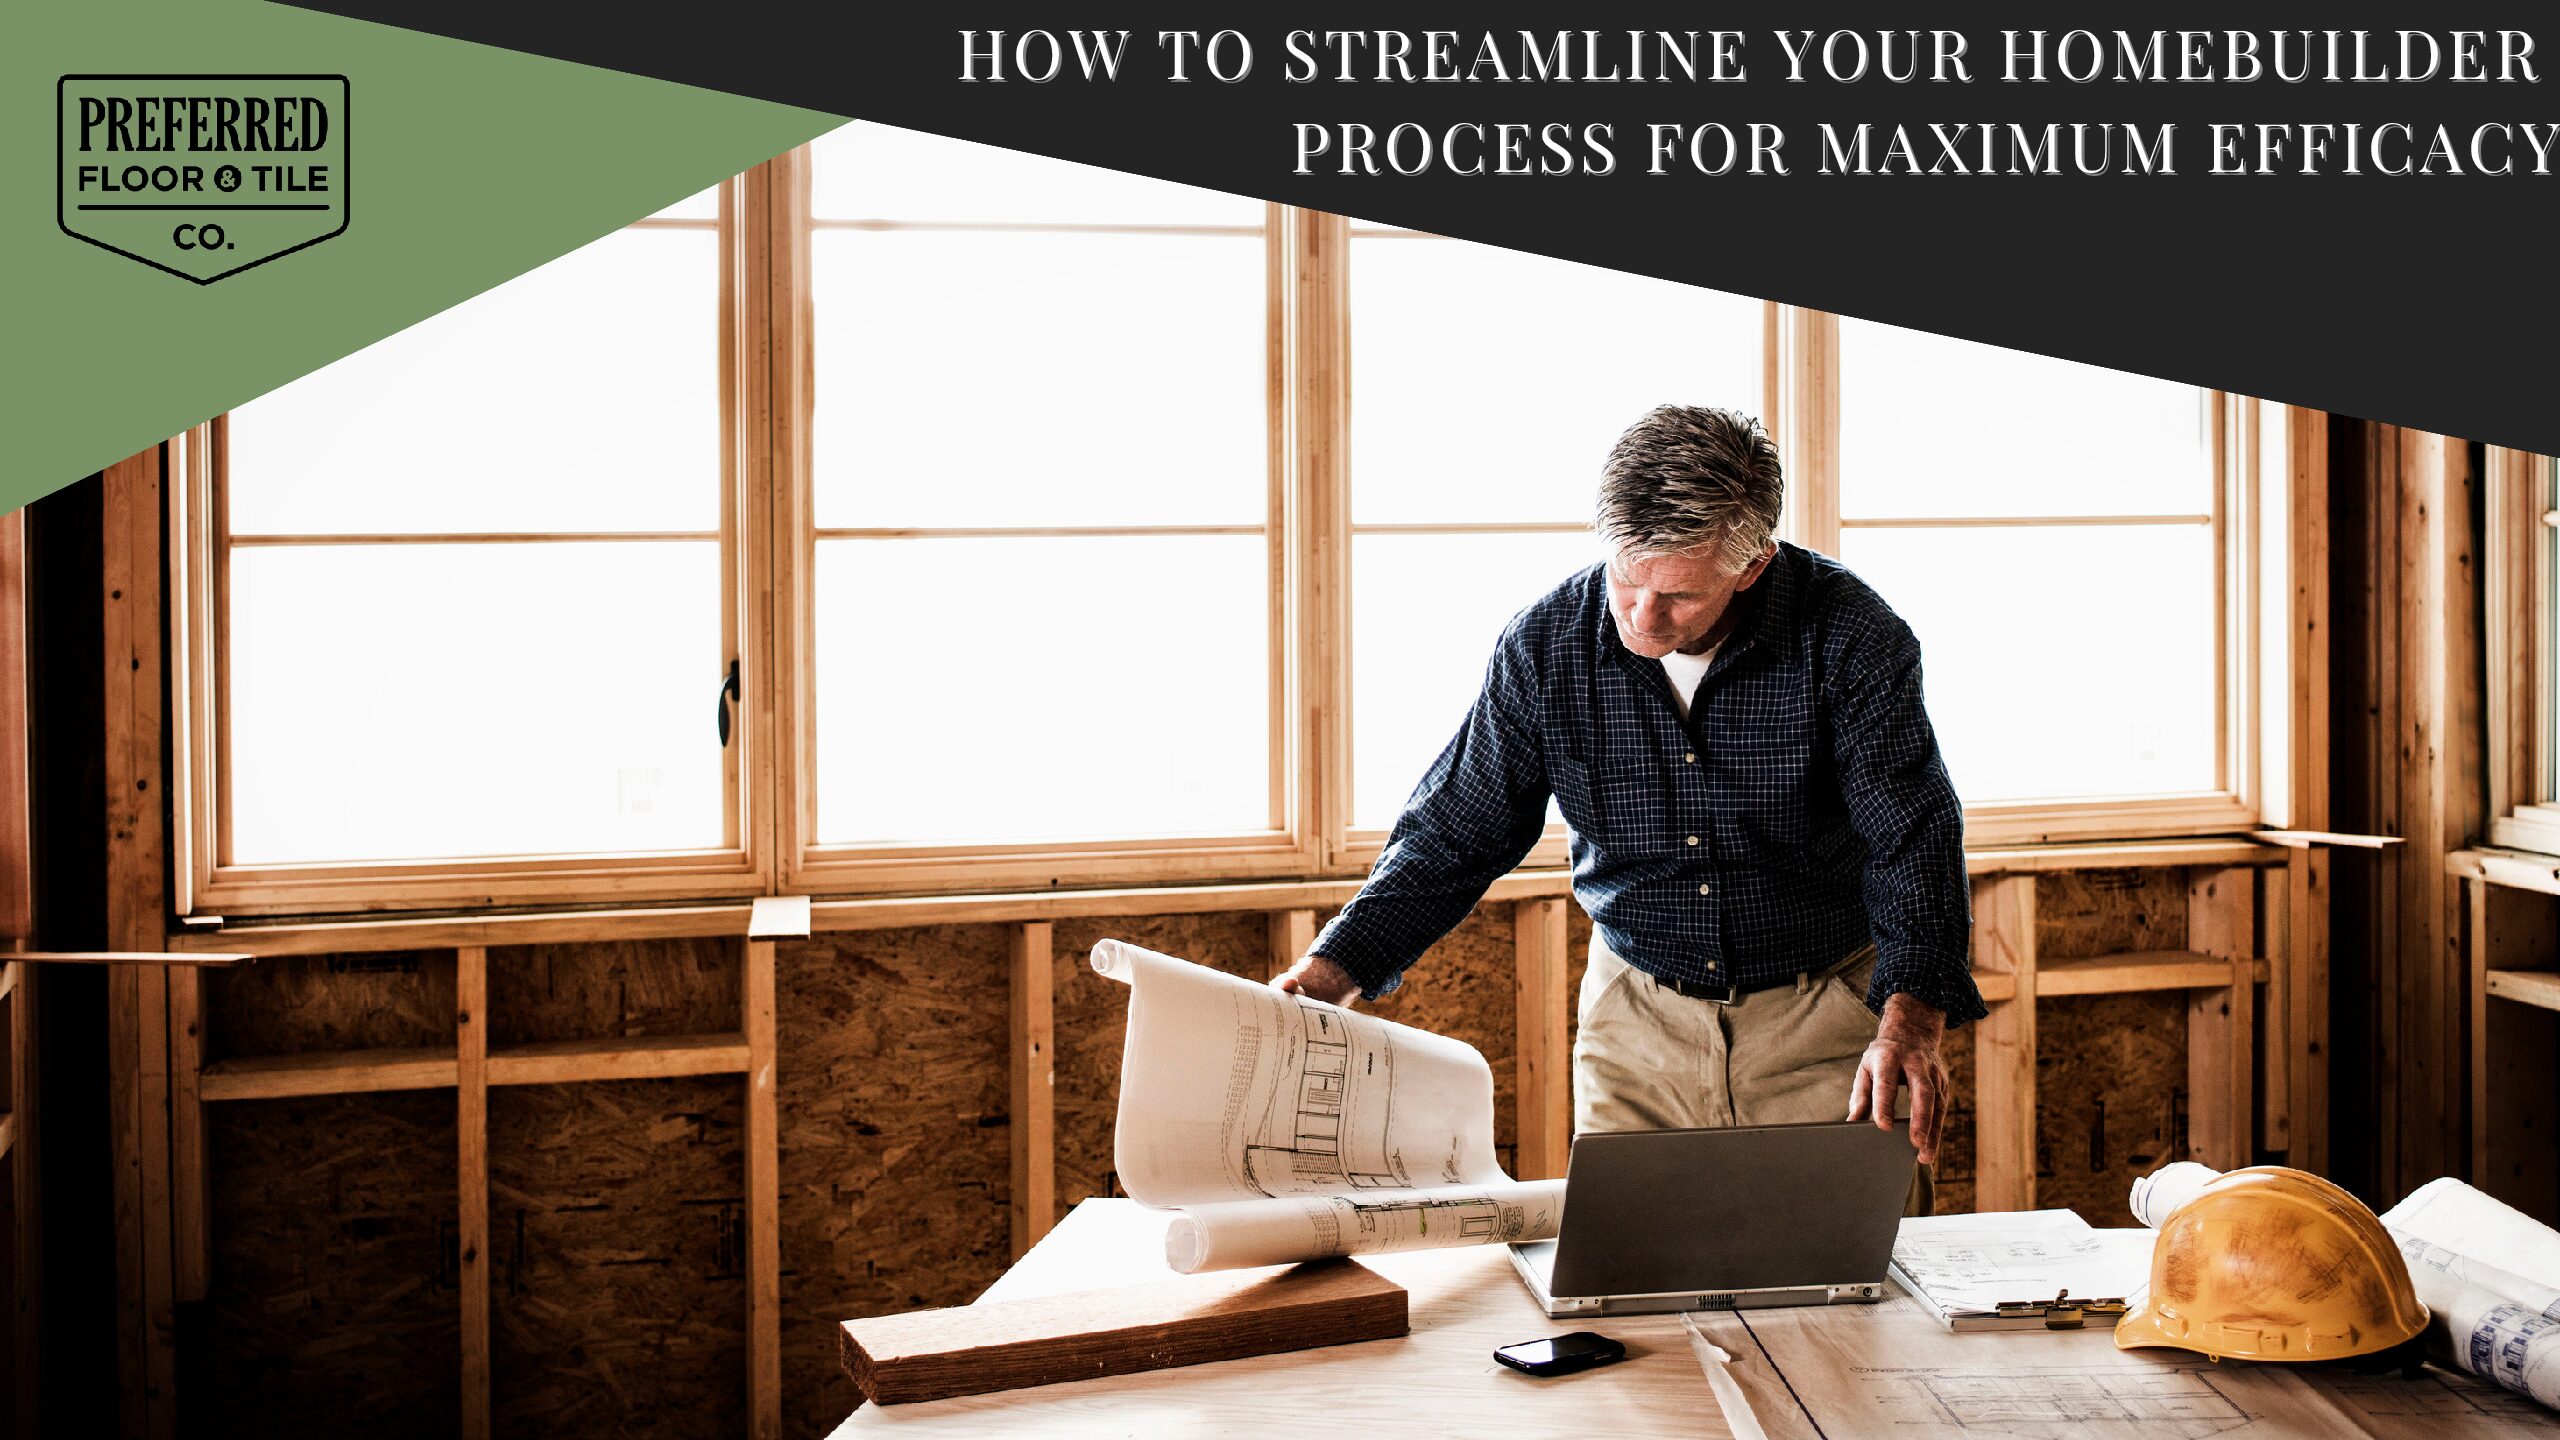 How to Streamline Your Homebuilder Process for Maximum Efficacy